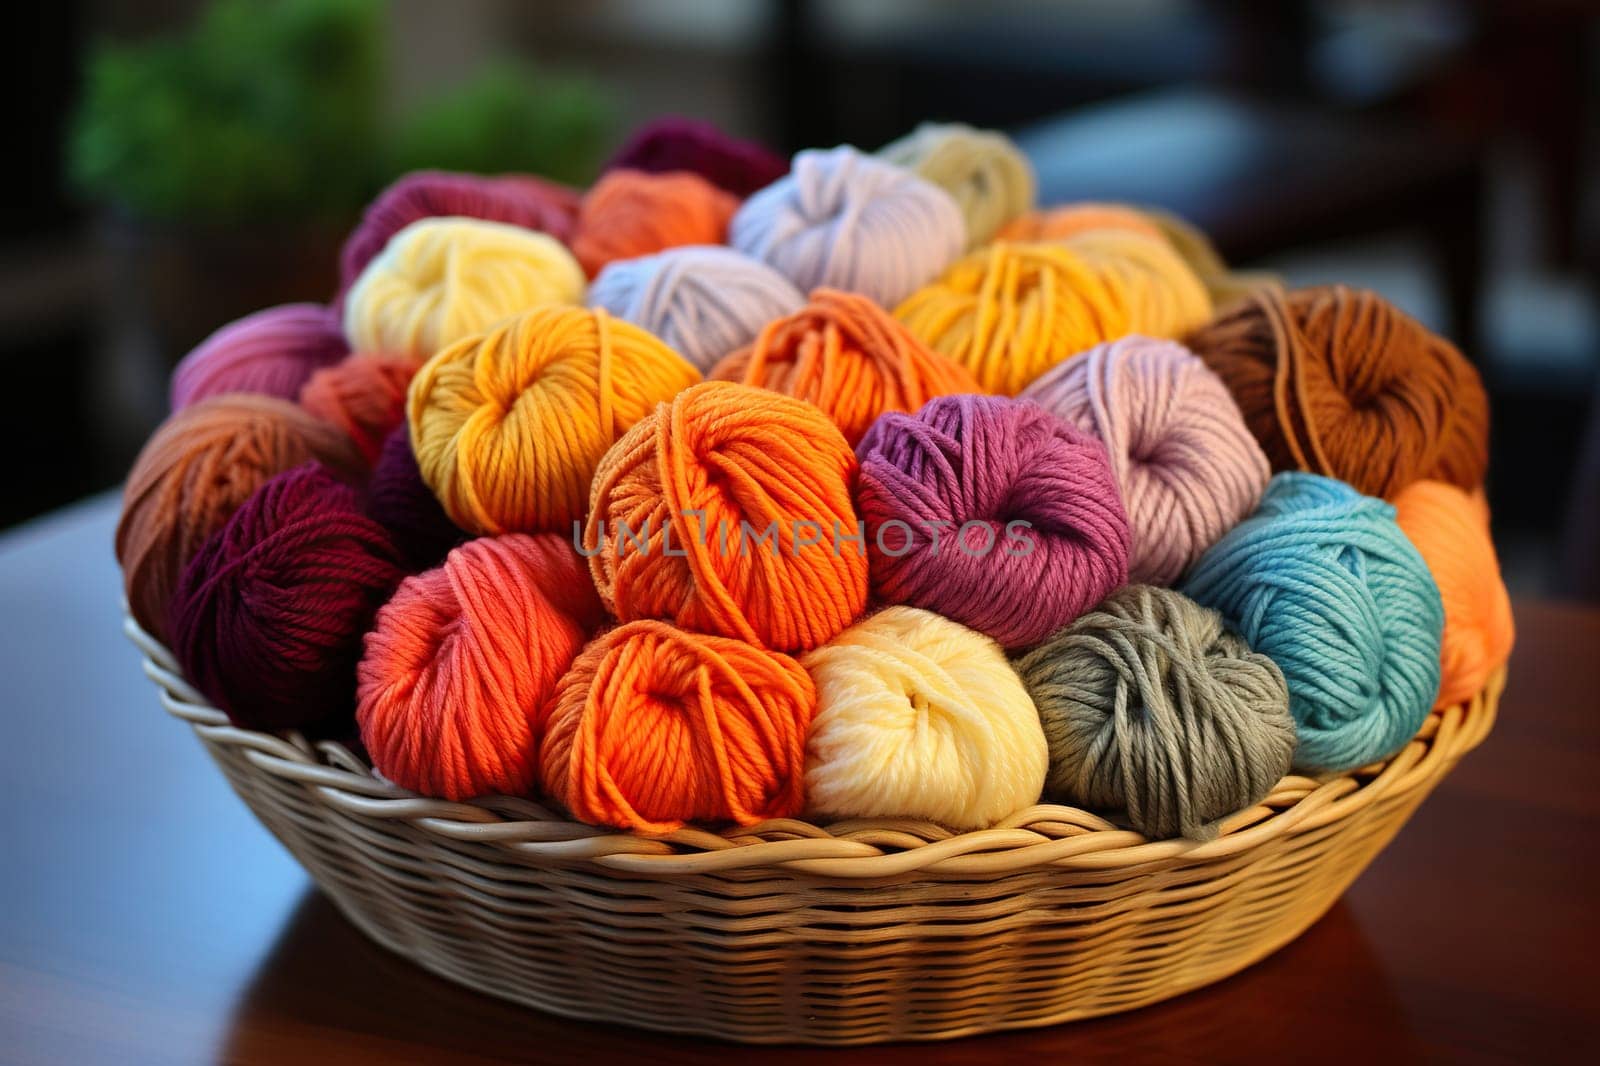 A basket with balls of yarn for knitting on the table. Hobby.